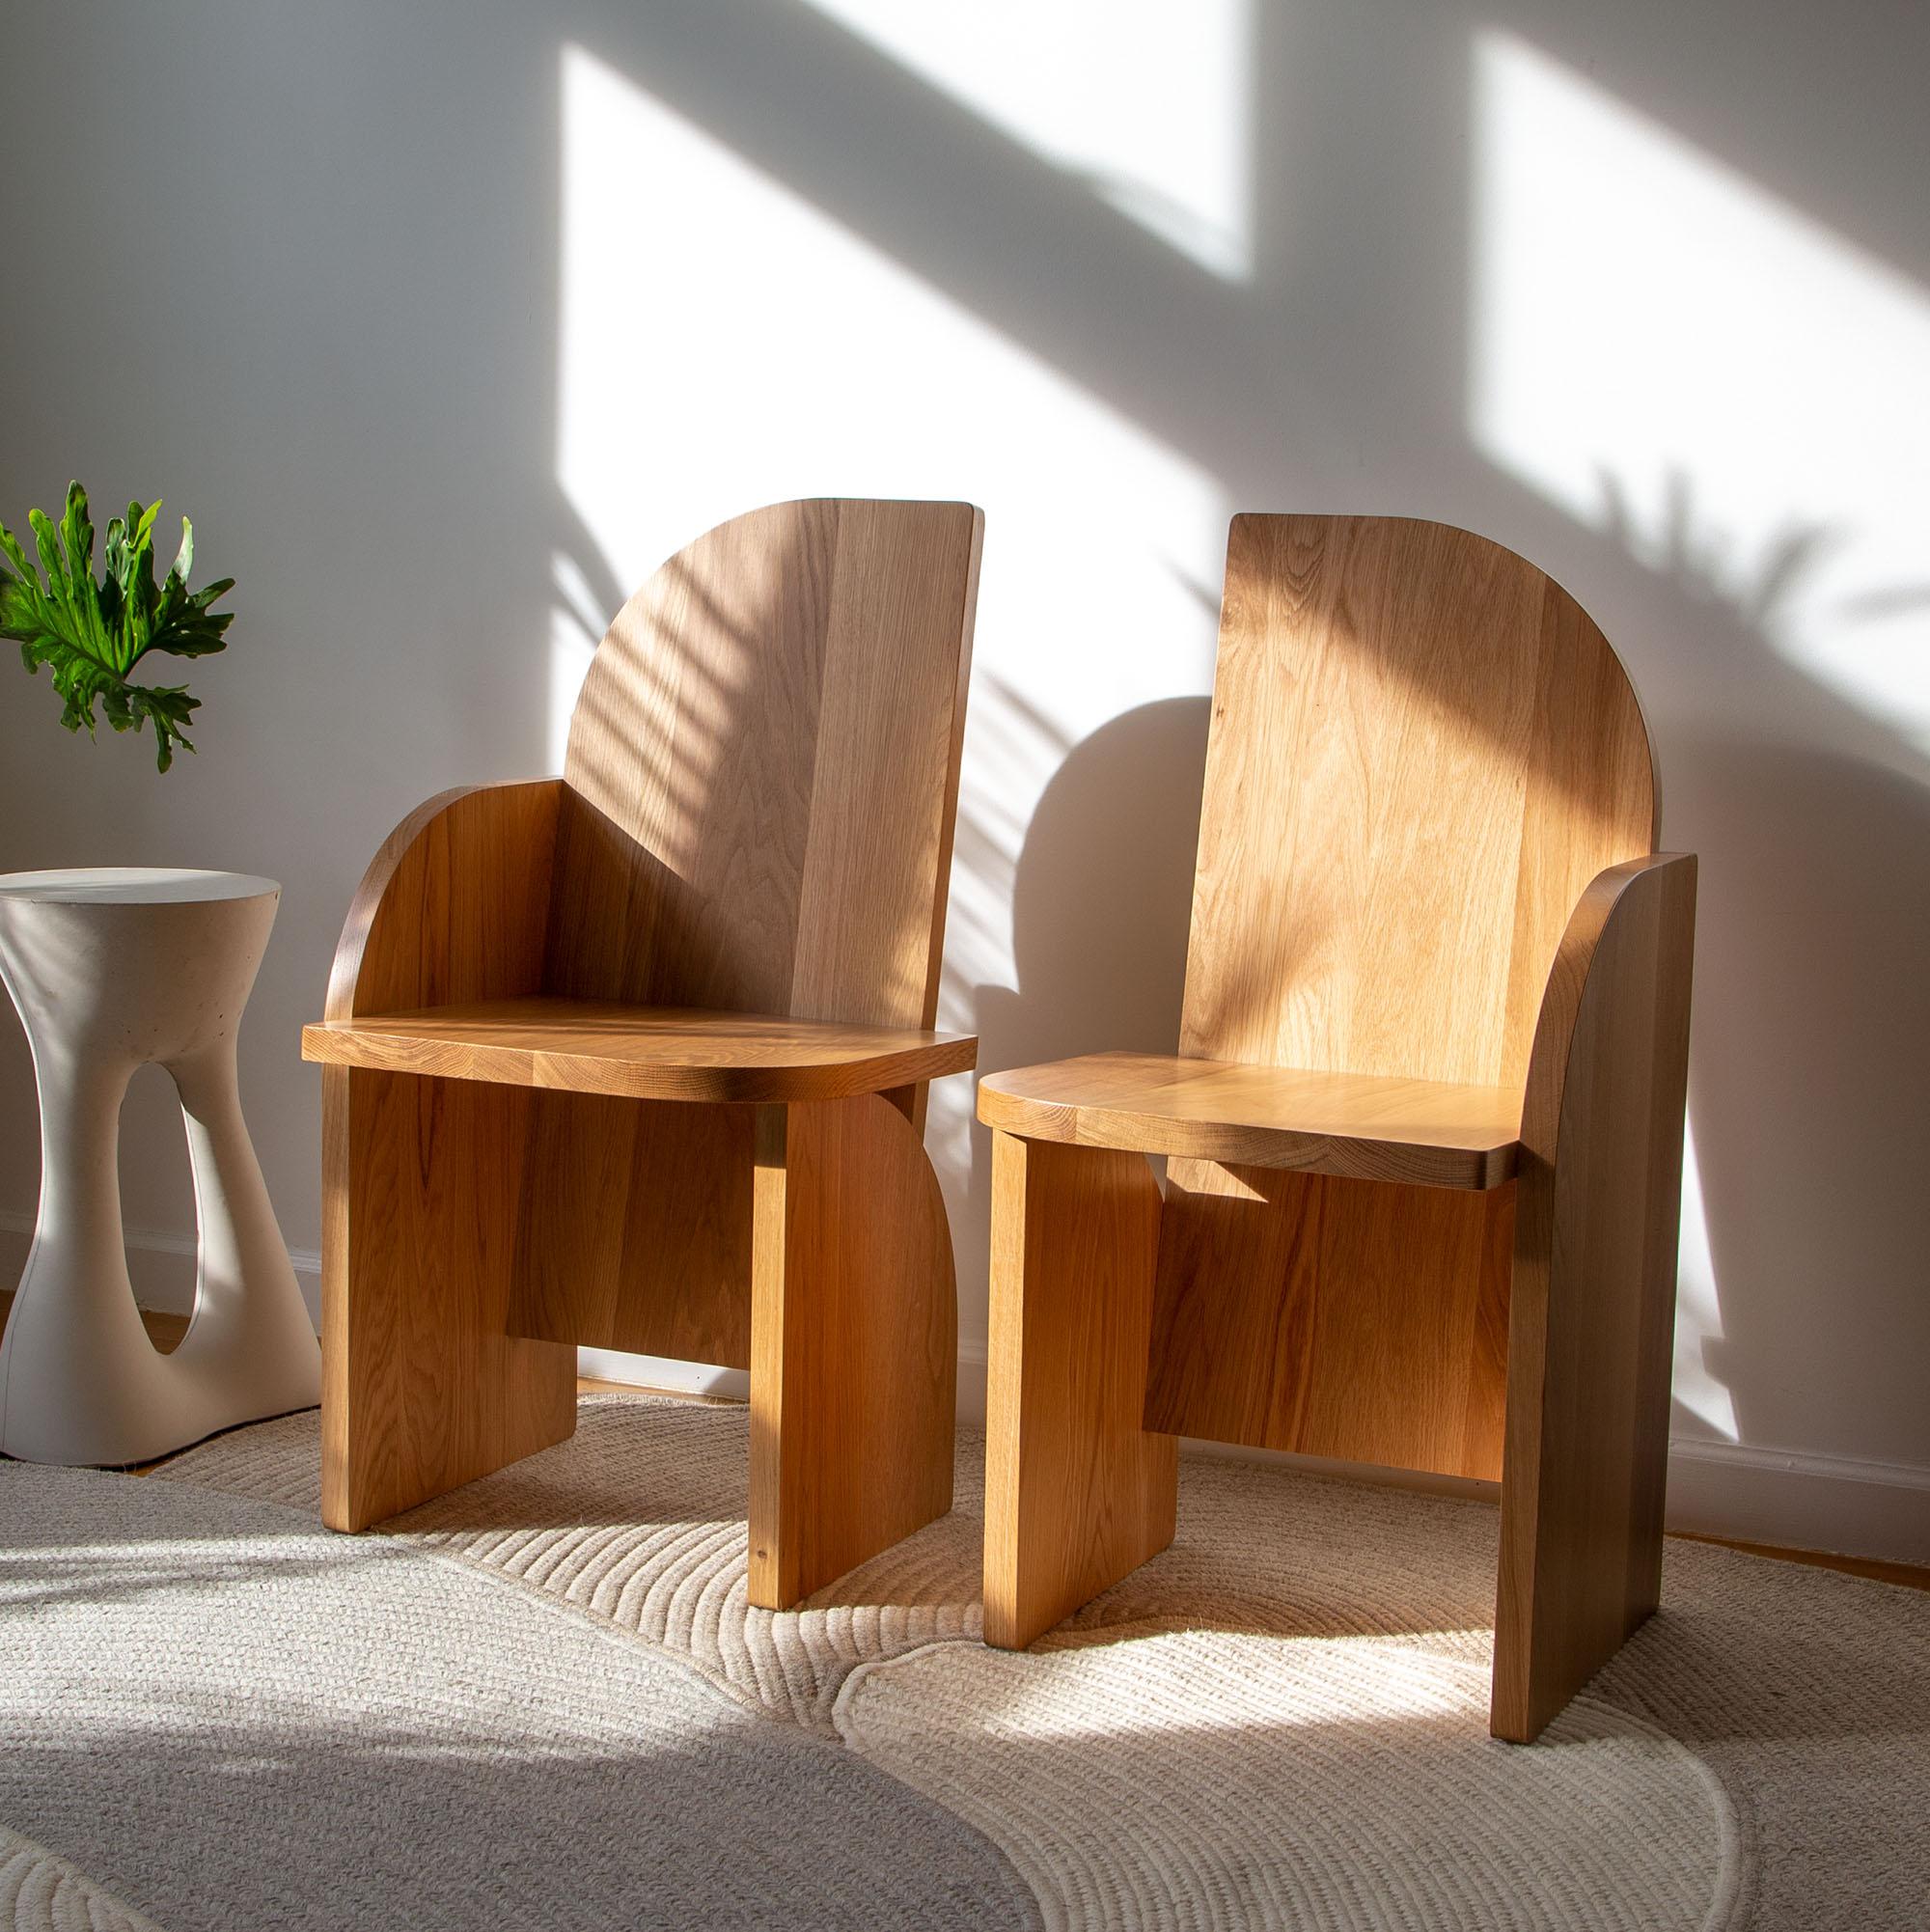 The Bluff Side Chair is an homage to the foothills surrounding Luft Tanaka's hometown of Kasugai, Japan. Poetic and architectural; planar yet curvy, the Bluff Side Chairs are sculptural accents that you can sit on. Each chair is handcrafted and